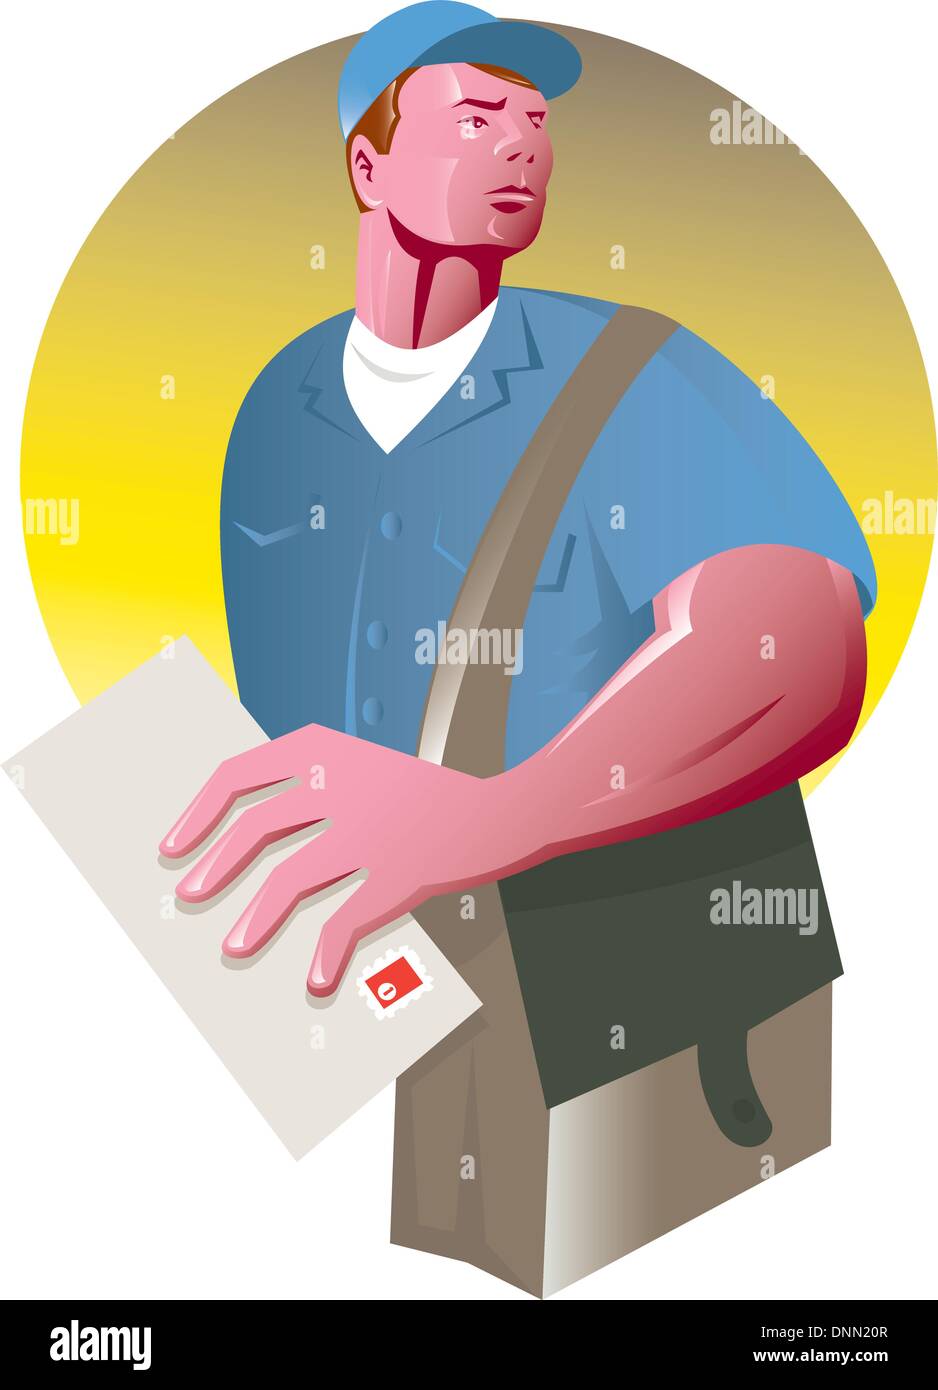 illustration of a postman mailman with holding an envelope and mailbag set inside a circle on isolated background Stock Vector